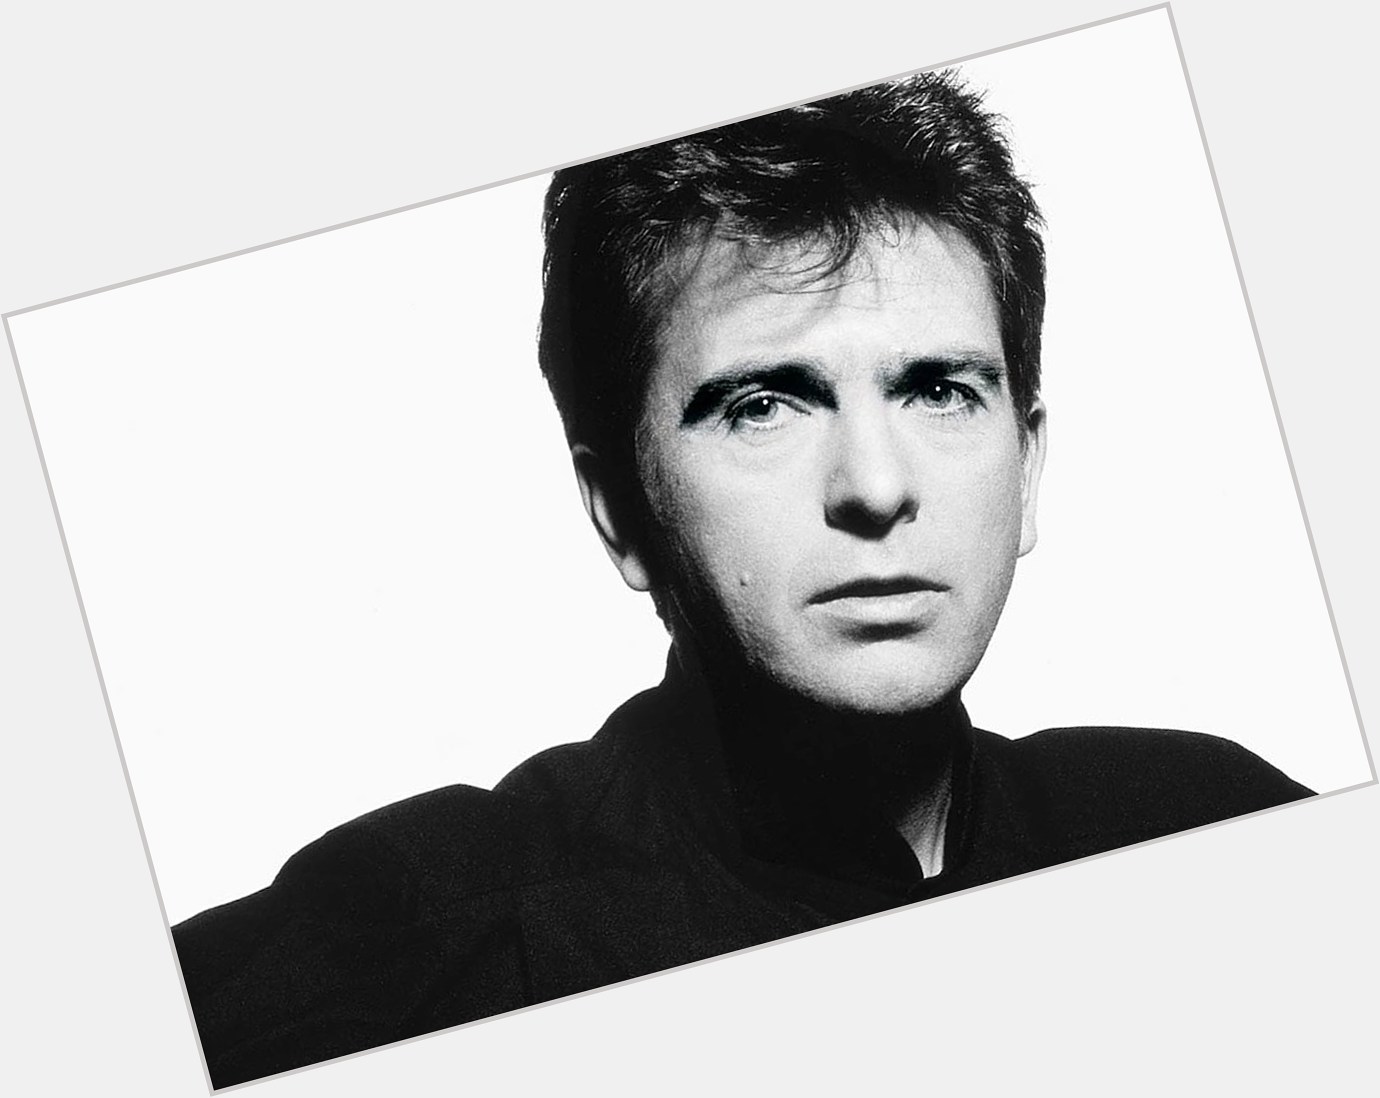 Happy birthday to Peter Gabriel!!! I\m so happy that I discovered his music last year! 